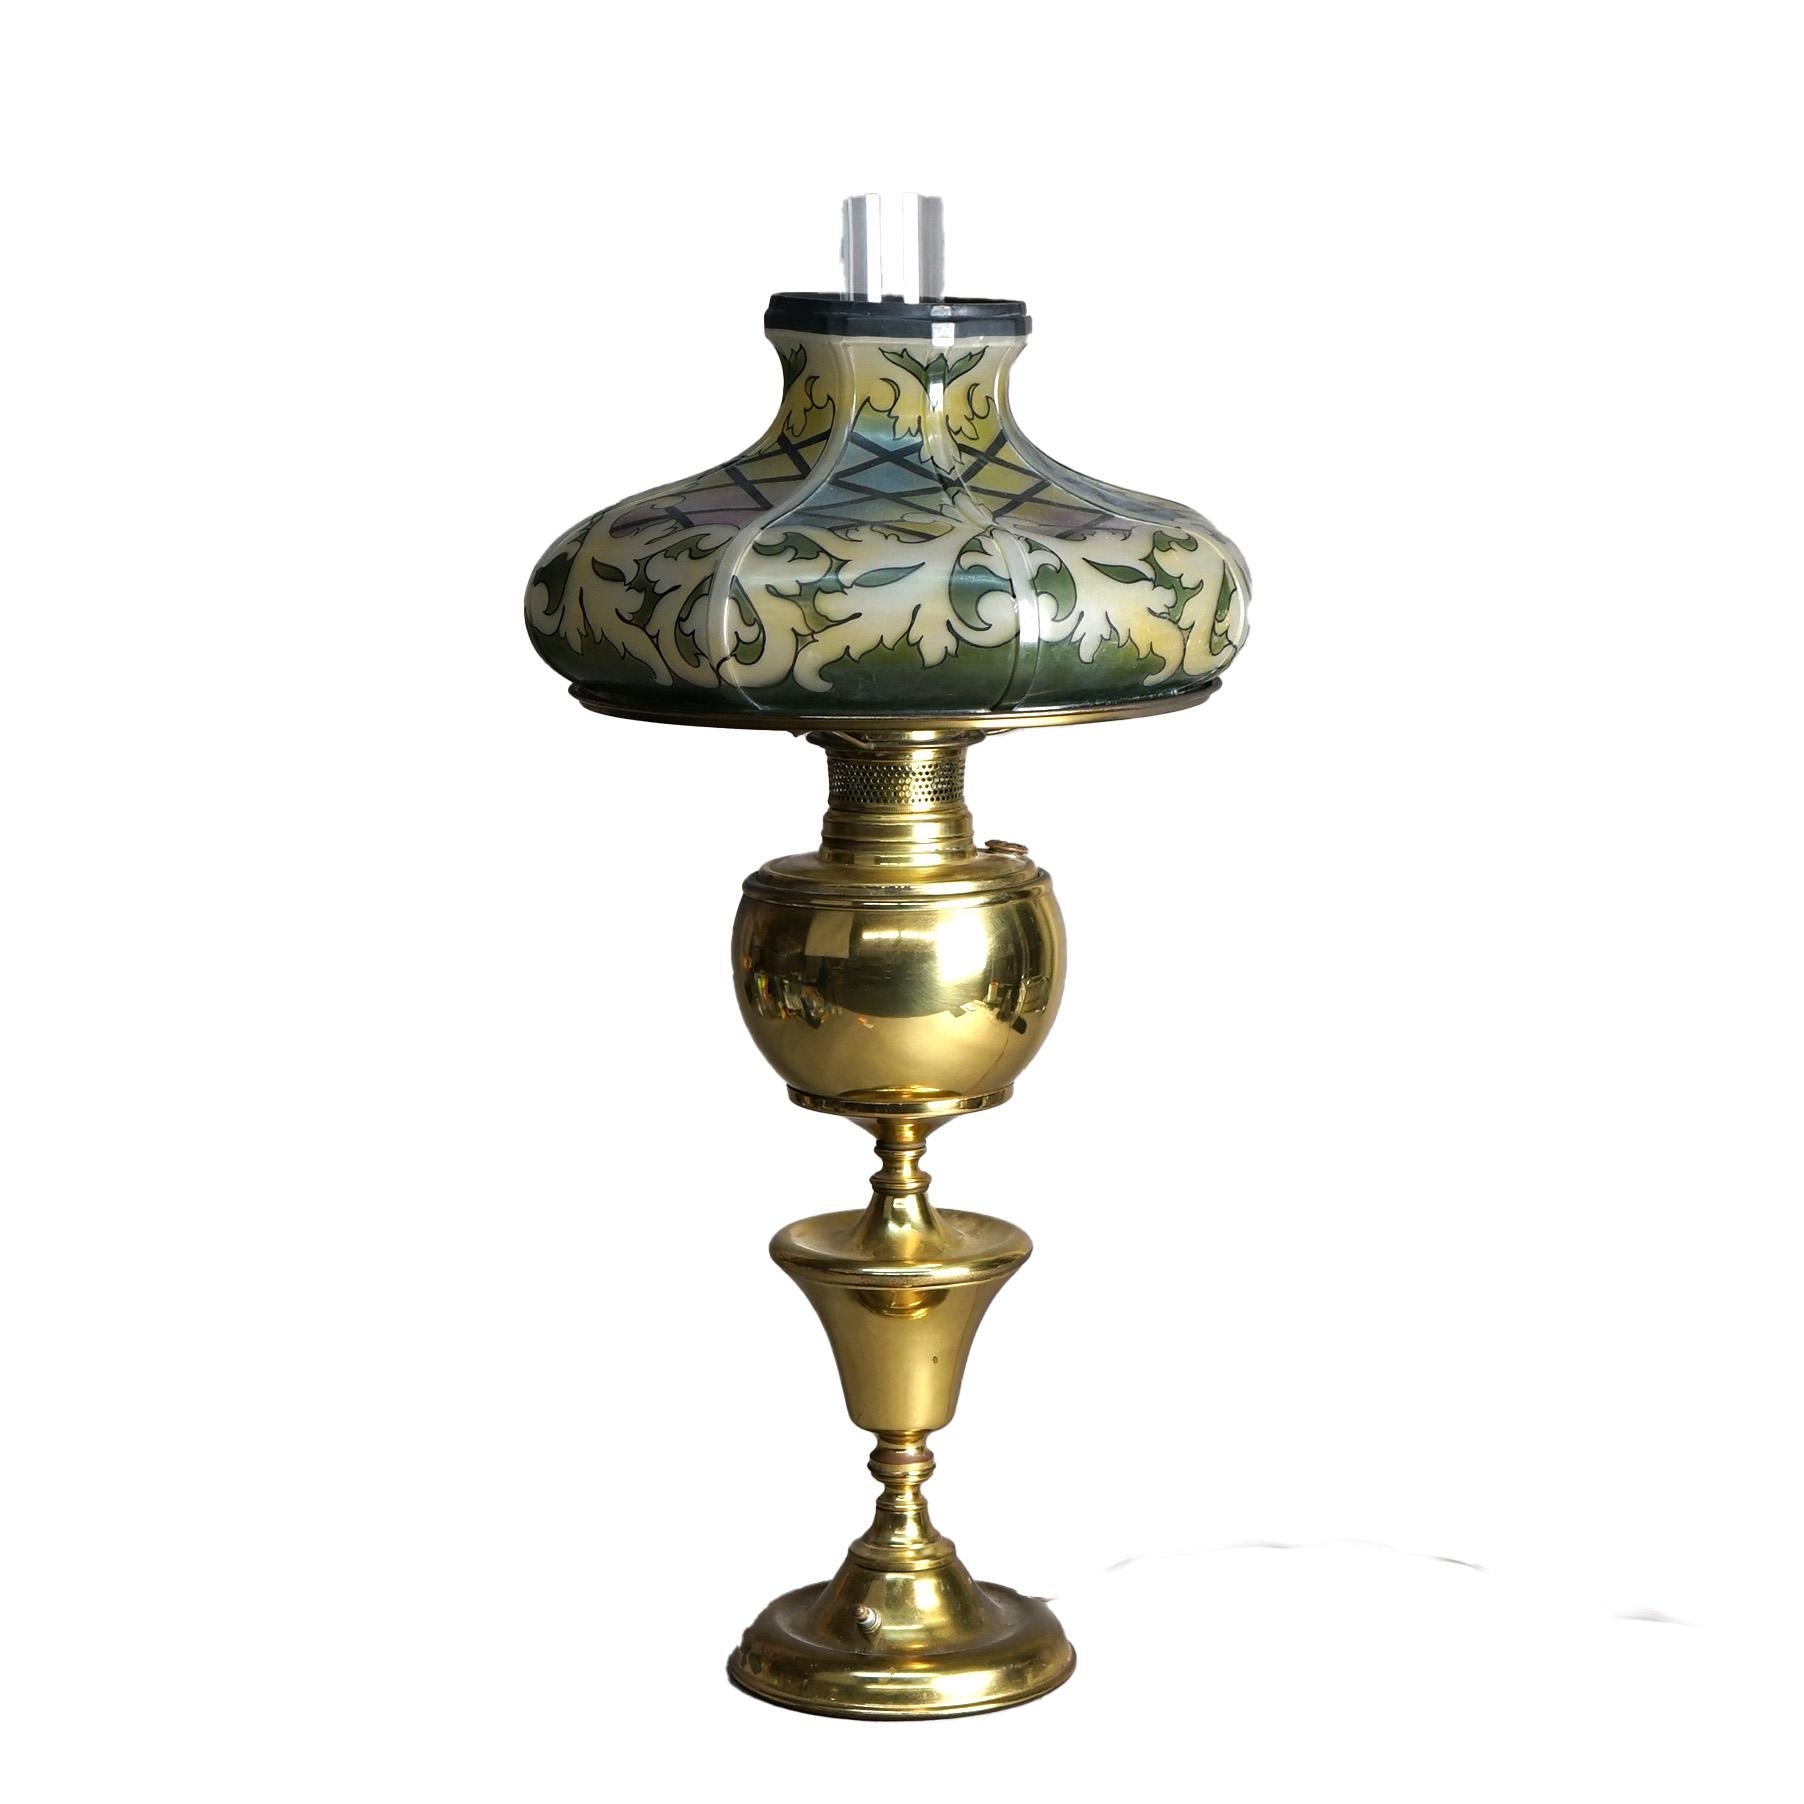 An antique Arts and Crafts banquet table lamp offers faceted glass shade with stylized leaded glass design over brass balustrade form base, c1910

Measures - 28 1/2